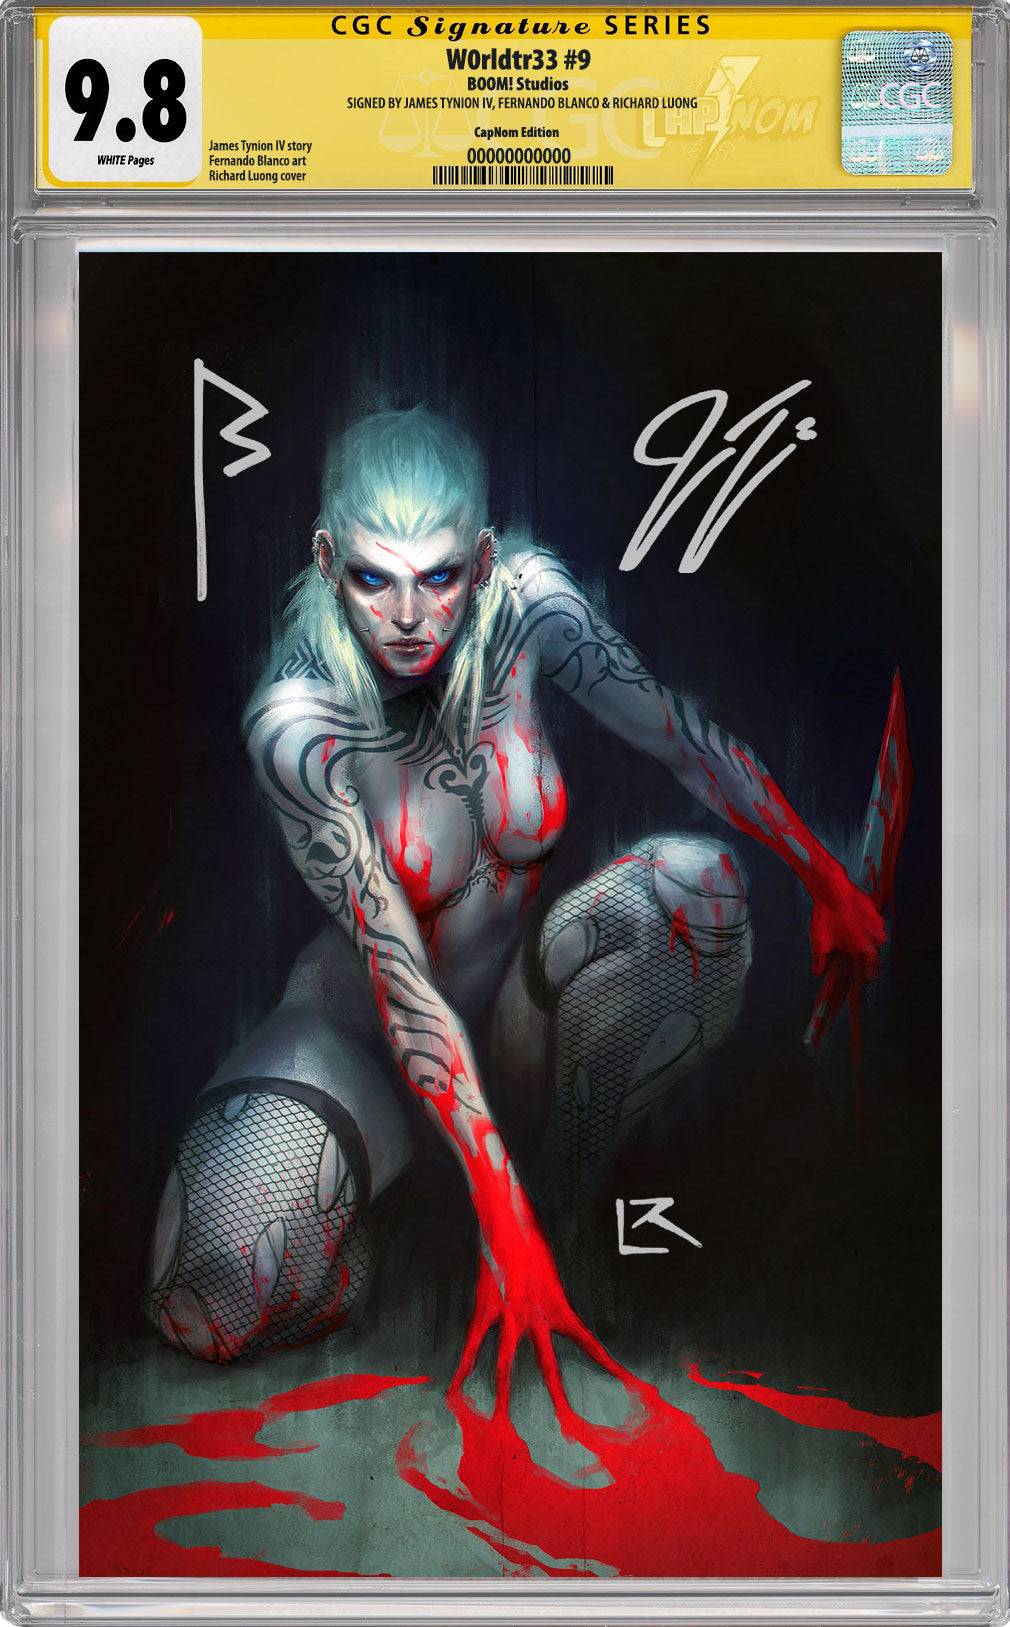 W0RLDTR33 #9 C2E2 Exclusive Virgin Cover "SHADOWS" CGC SS 9.8 SIGNED BY TYNION, BLANCO & LUONG